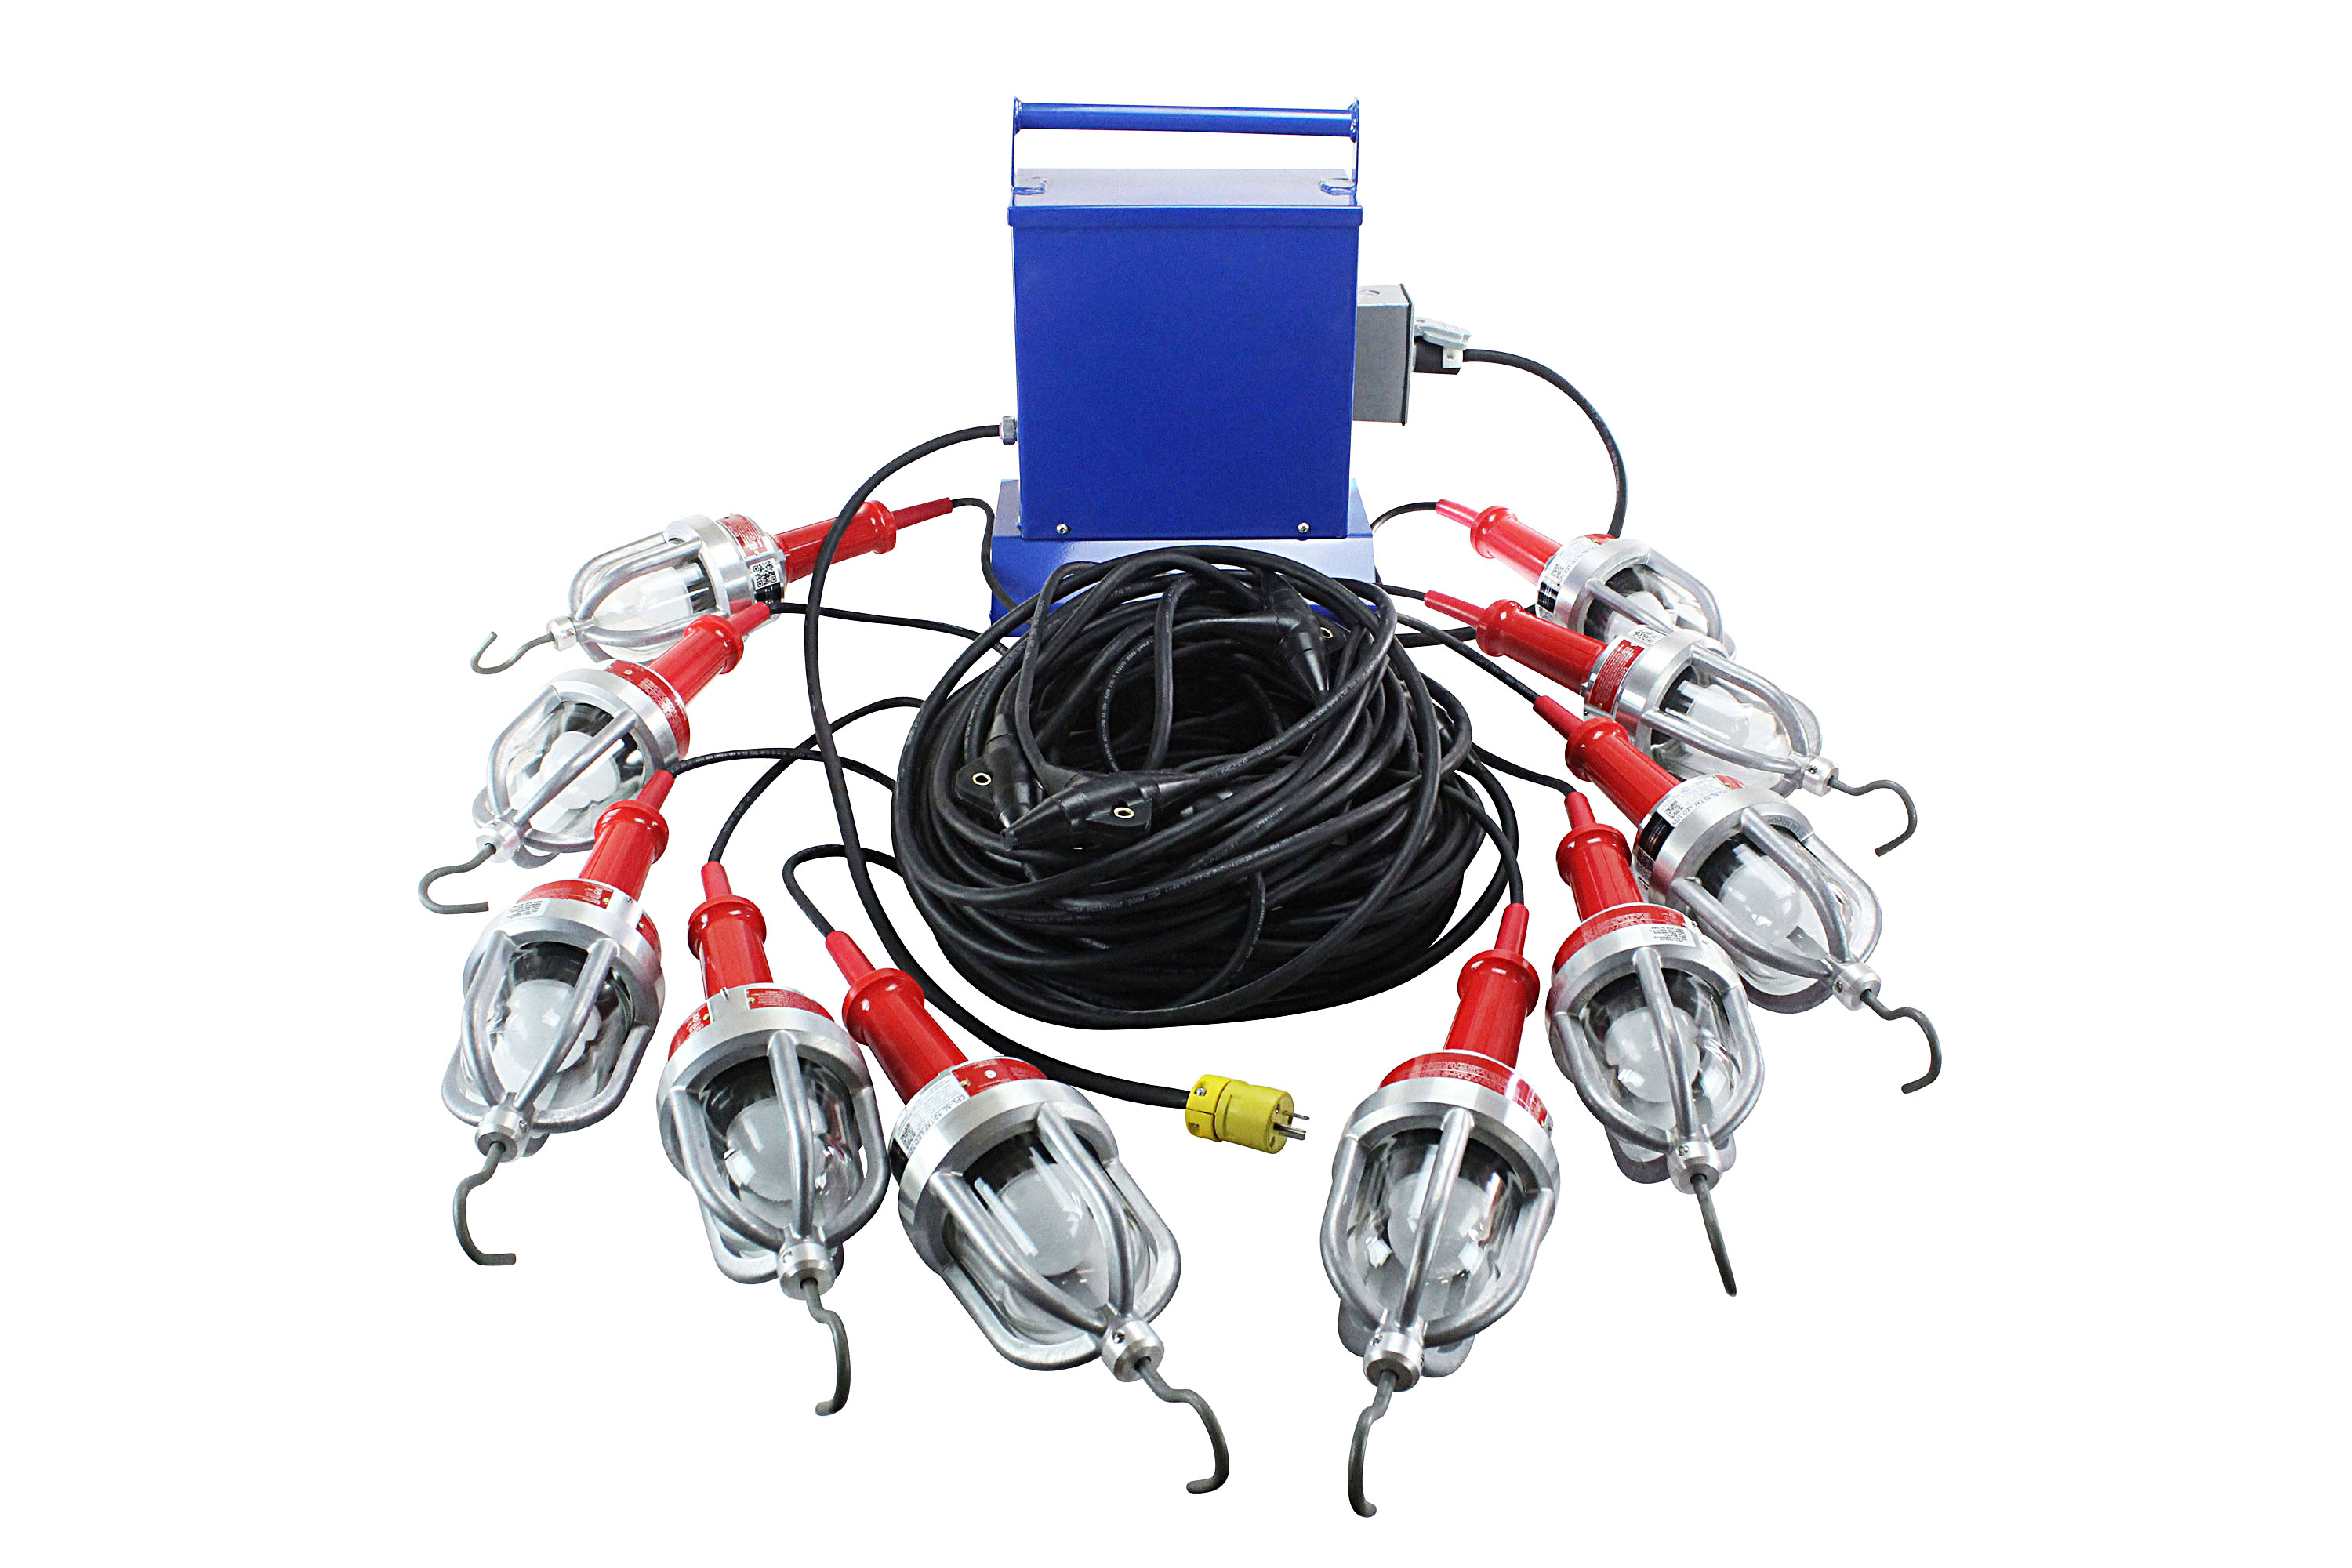 Class 1 Division 1 Explosion Proof String Light Set Equipped with 10 Drop Lights